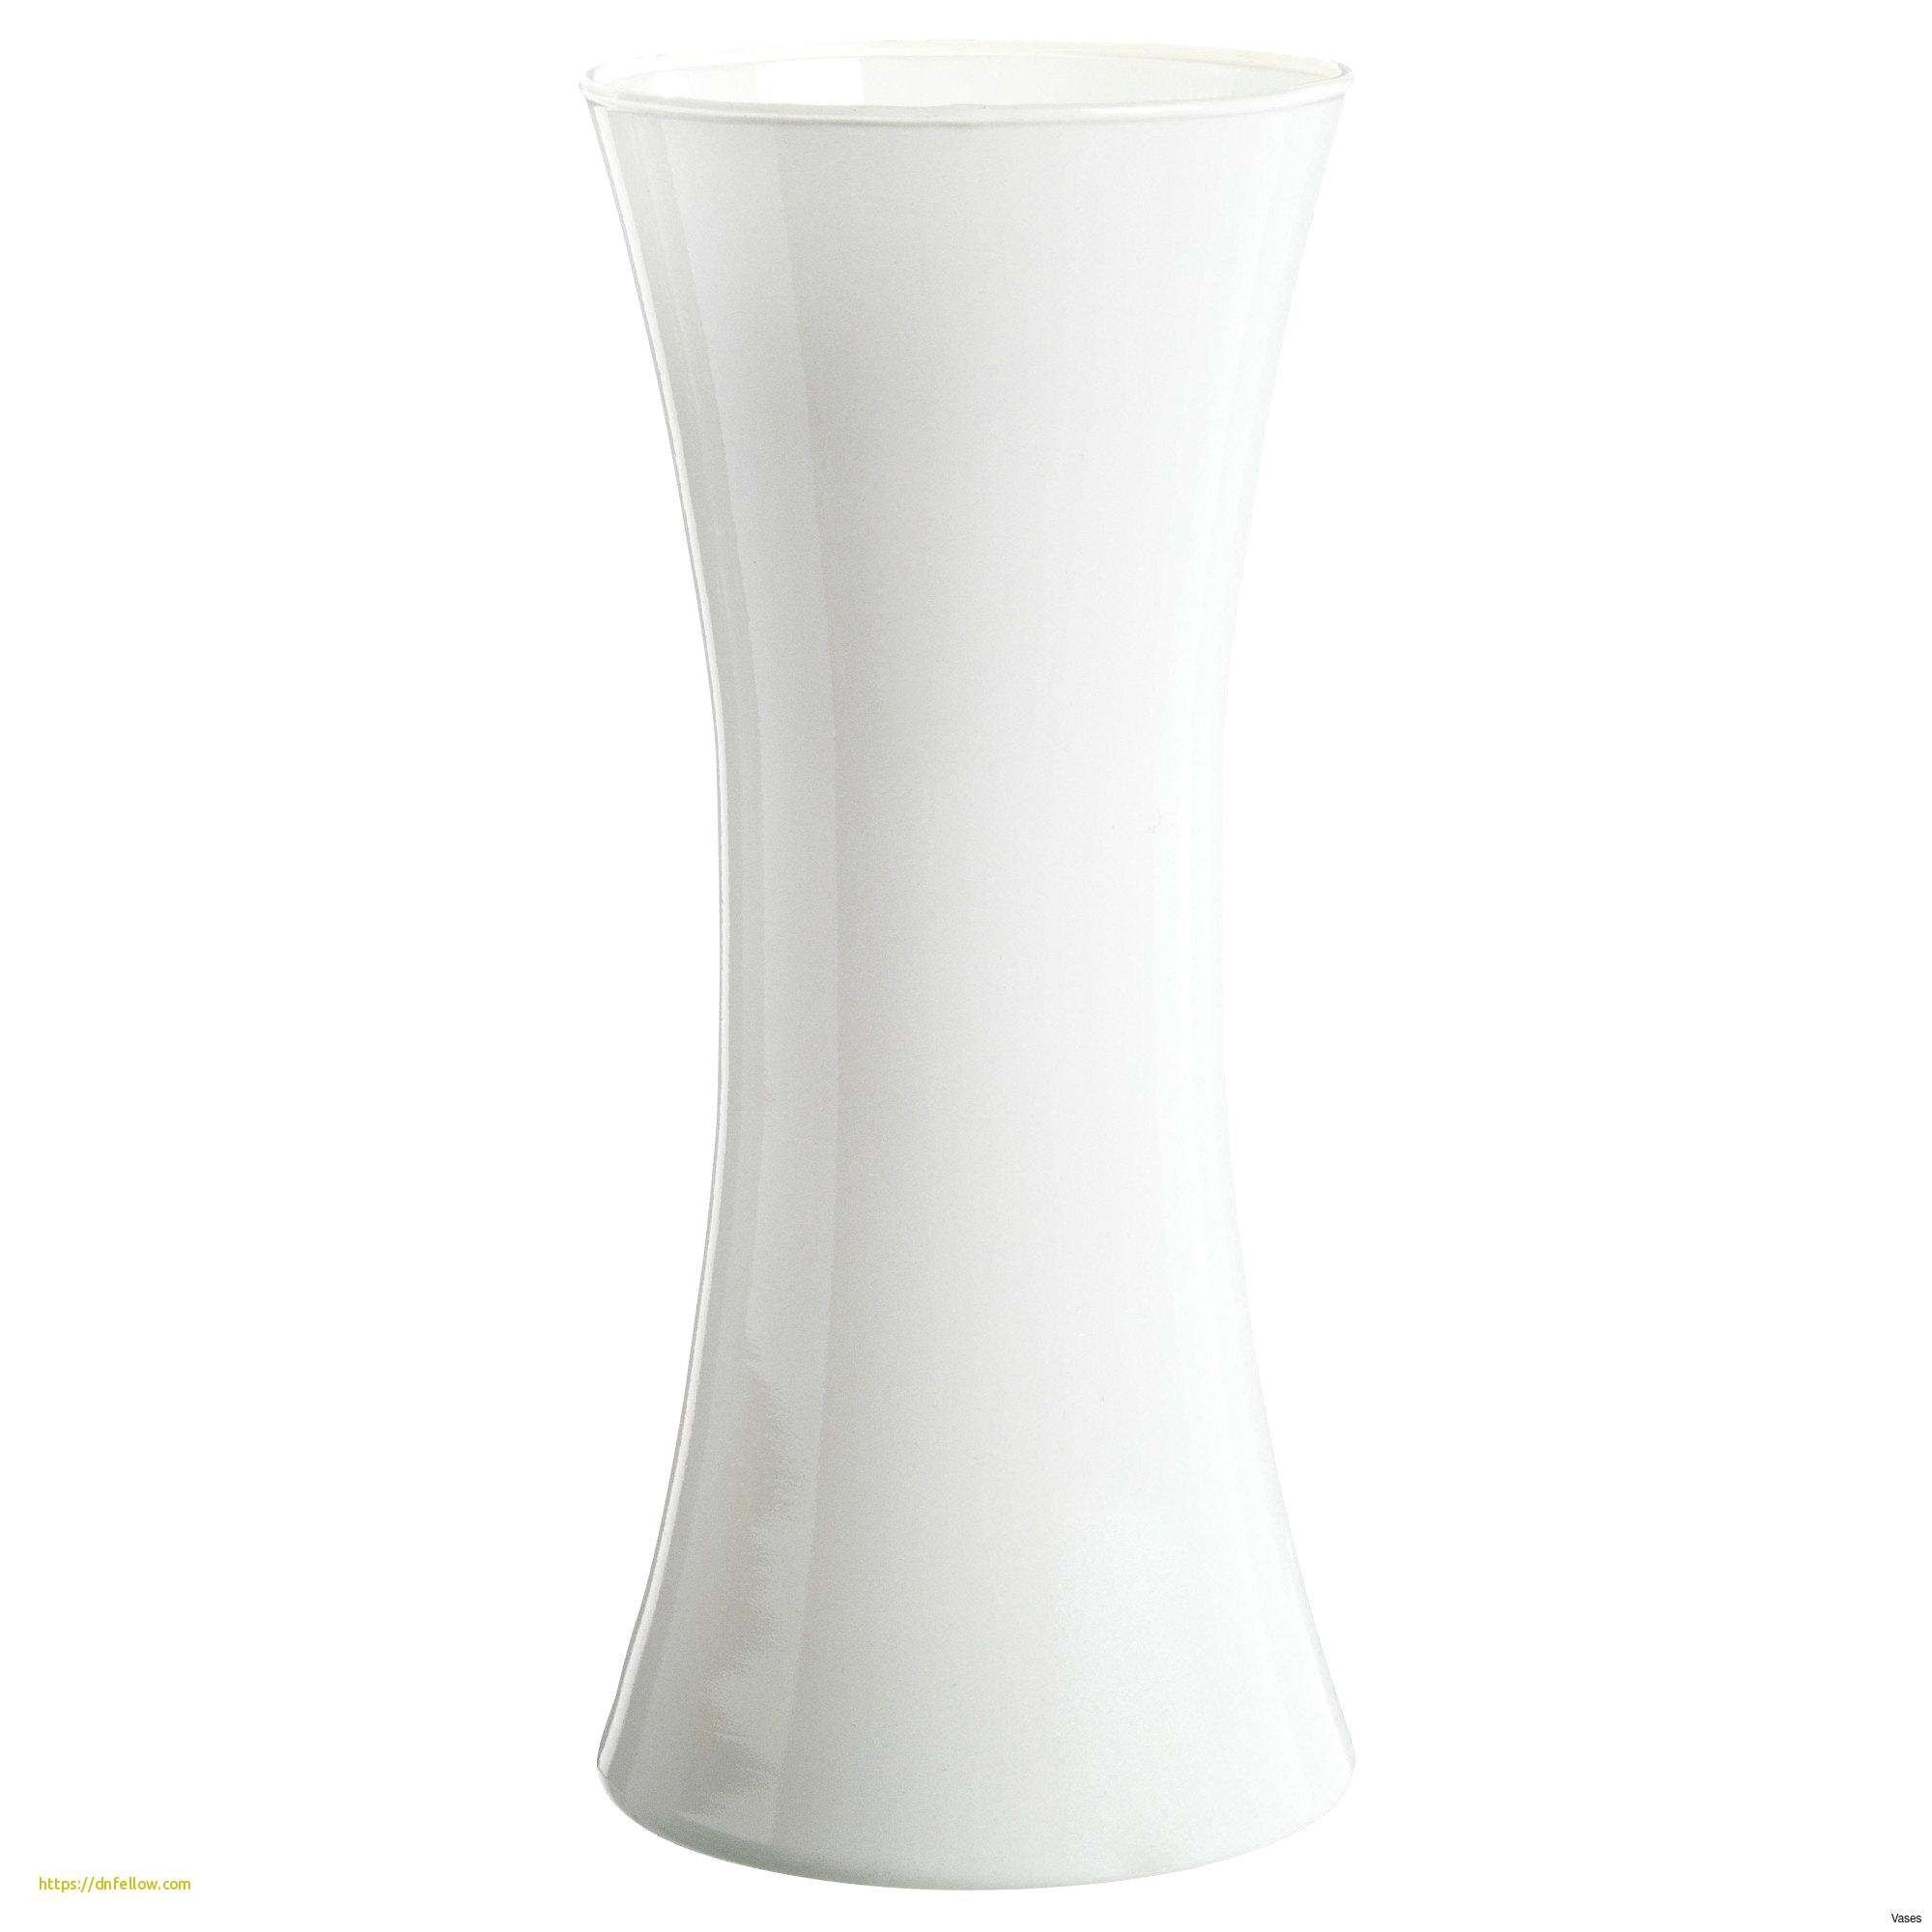 17 attractive Blue and White Floral Ceramic Vase 2023 free download blue and white floral ceramic vase of white vase set new white floor vase ceramic modern 40 inchl home throughout white vase set new white floor vase ceramic modern 40 inchl home design ikea